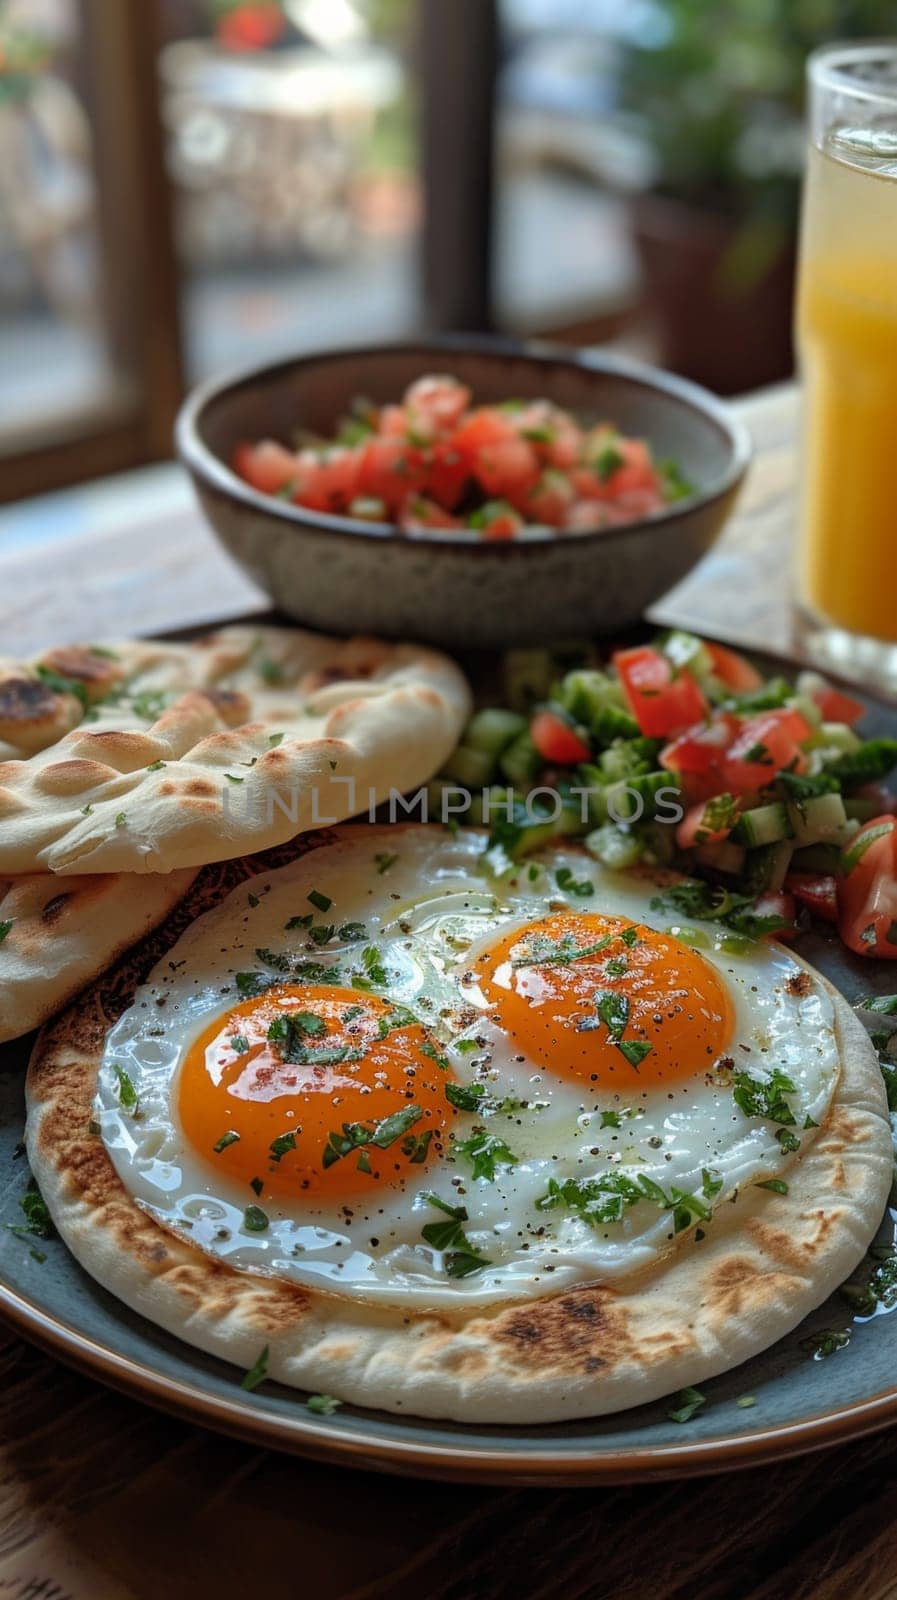 Typical Israeli breakfast with two eggs on a plate and a salad next to it in the bowl by papatonic